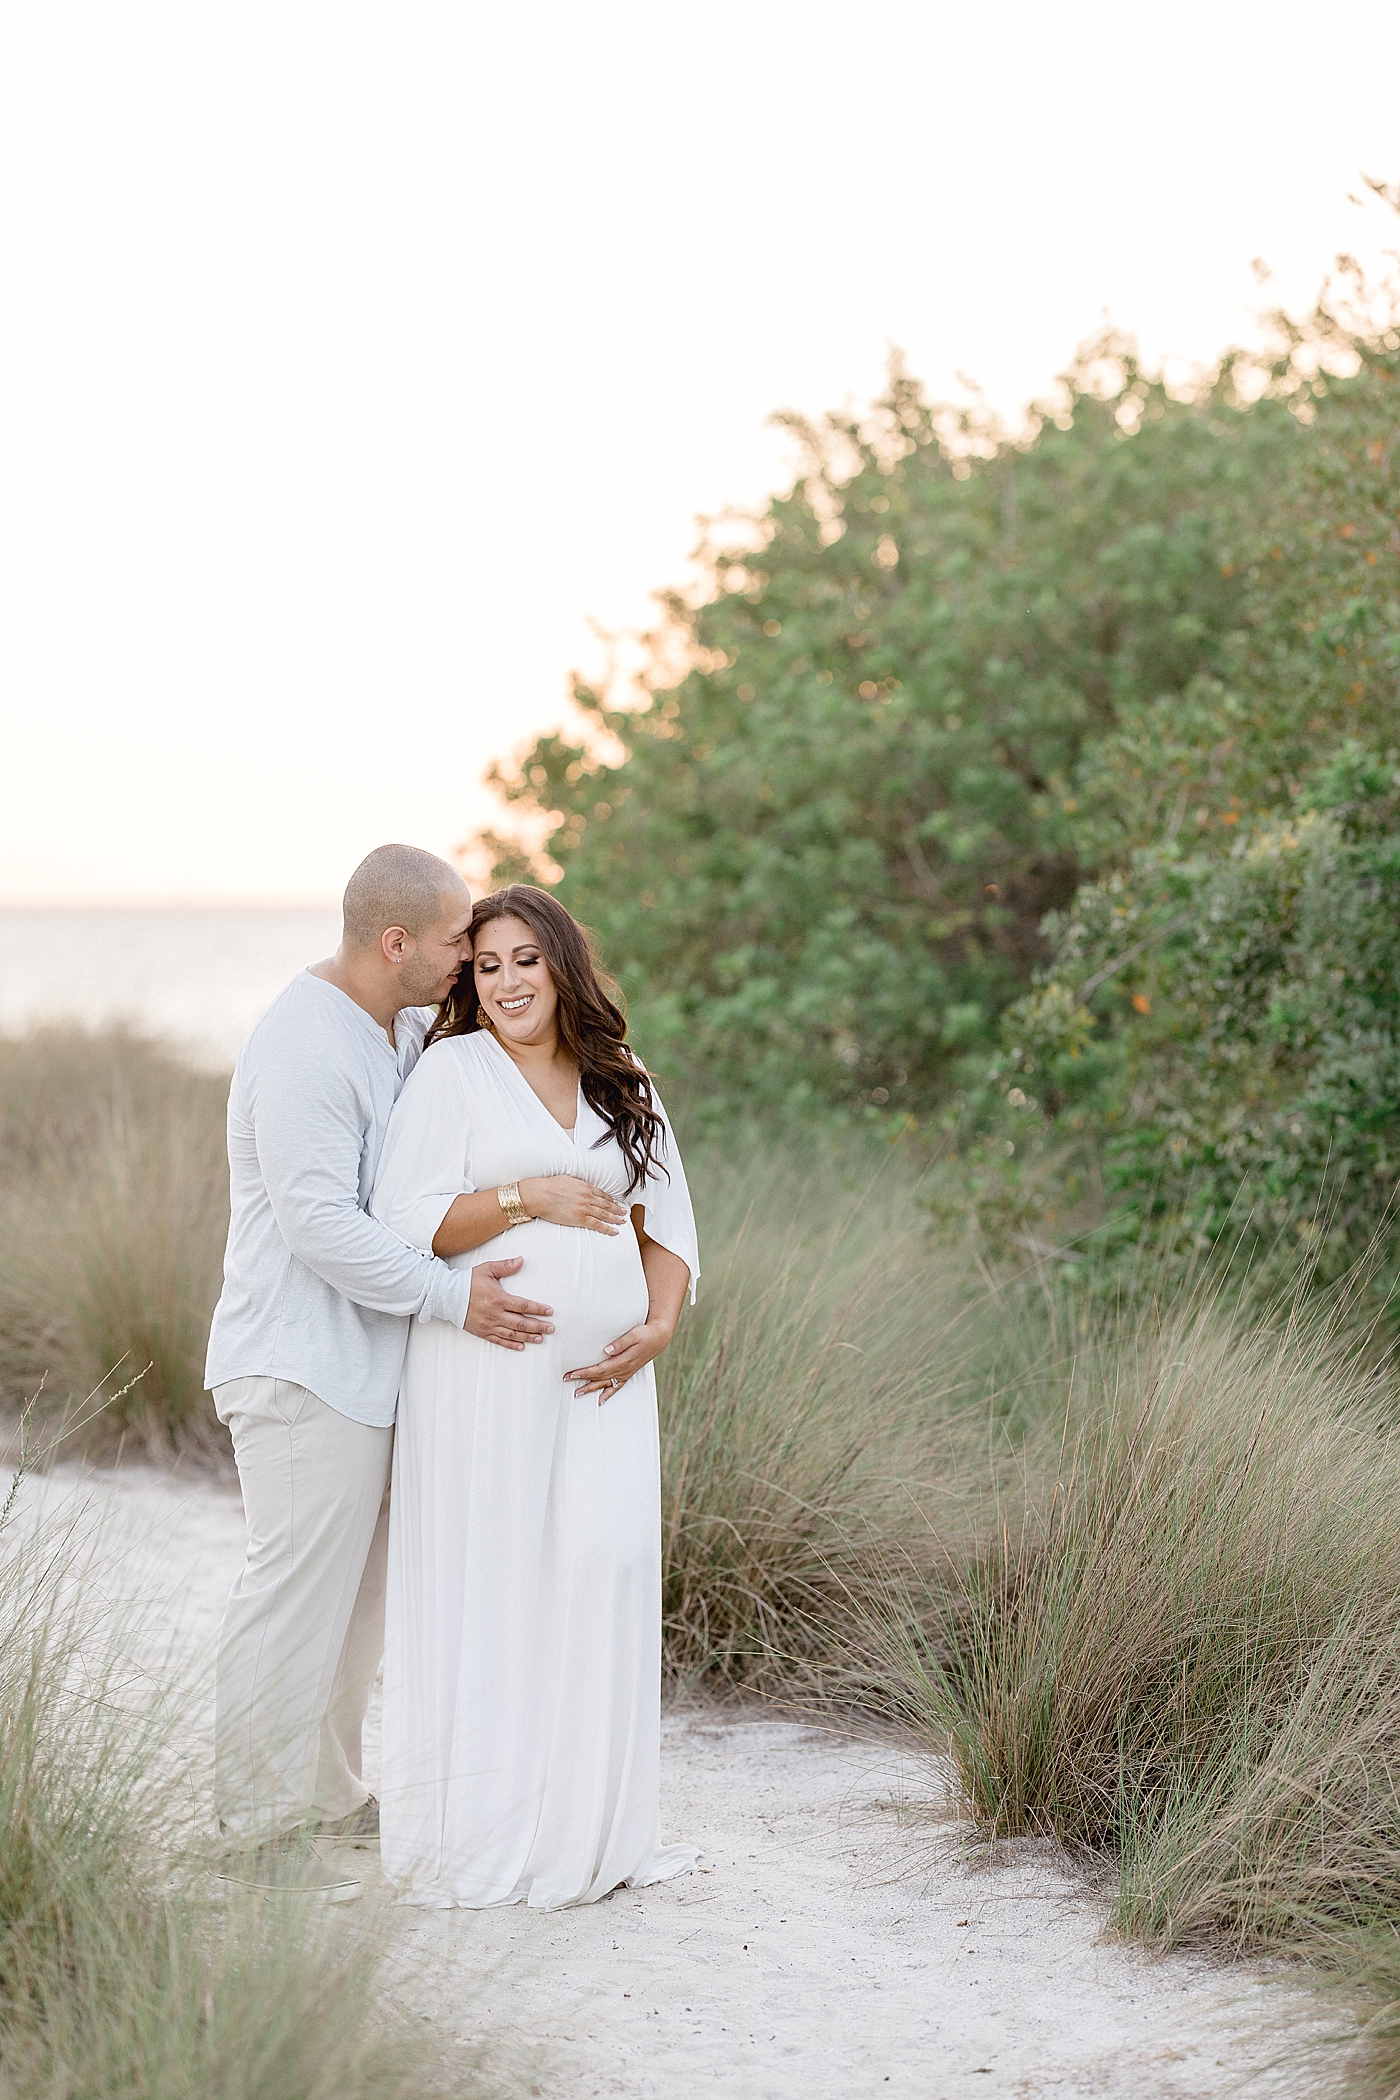 Couple sharing a sweet moment during maternity session at Cypress Point Park. Photo by Brittany Elise Photography.